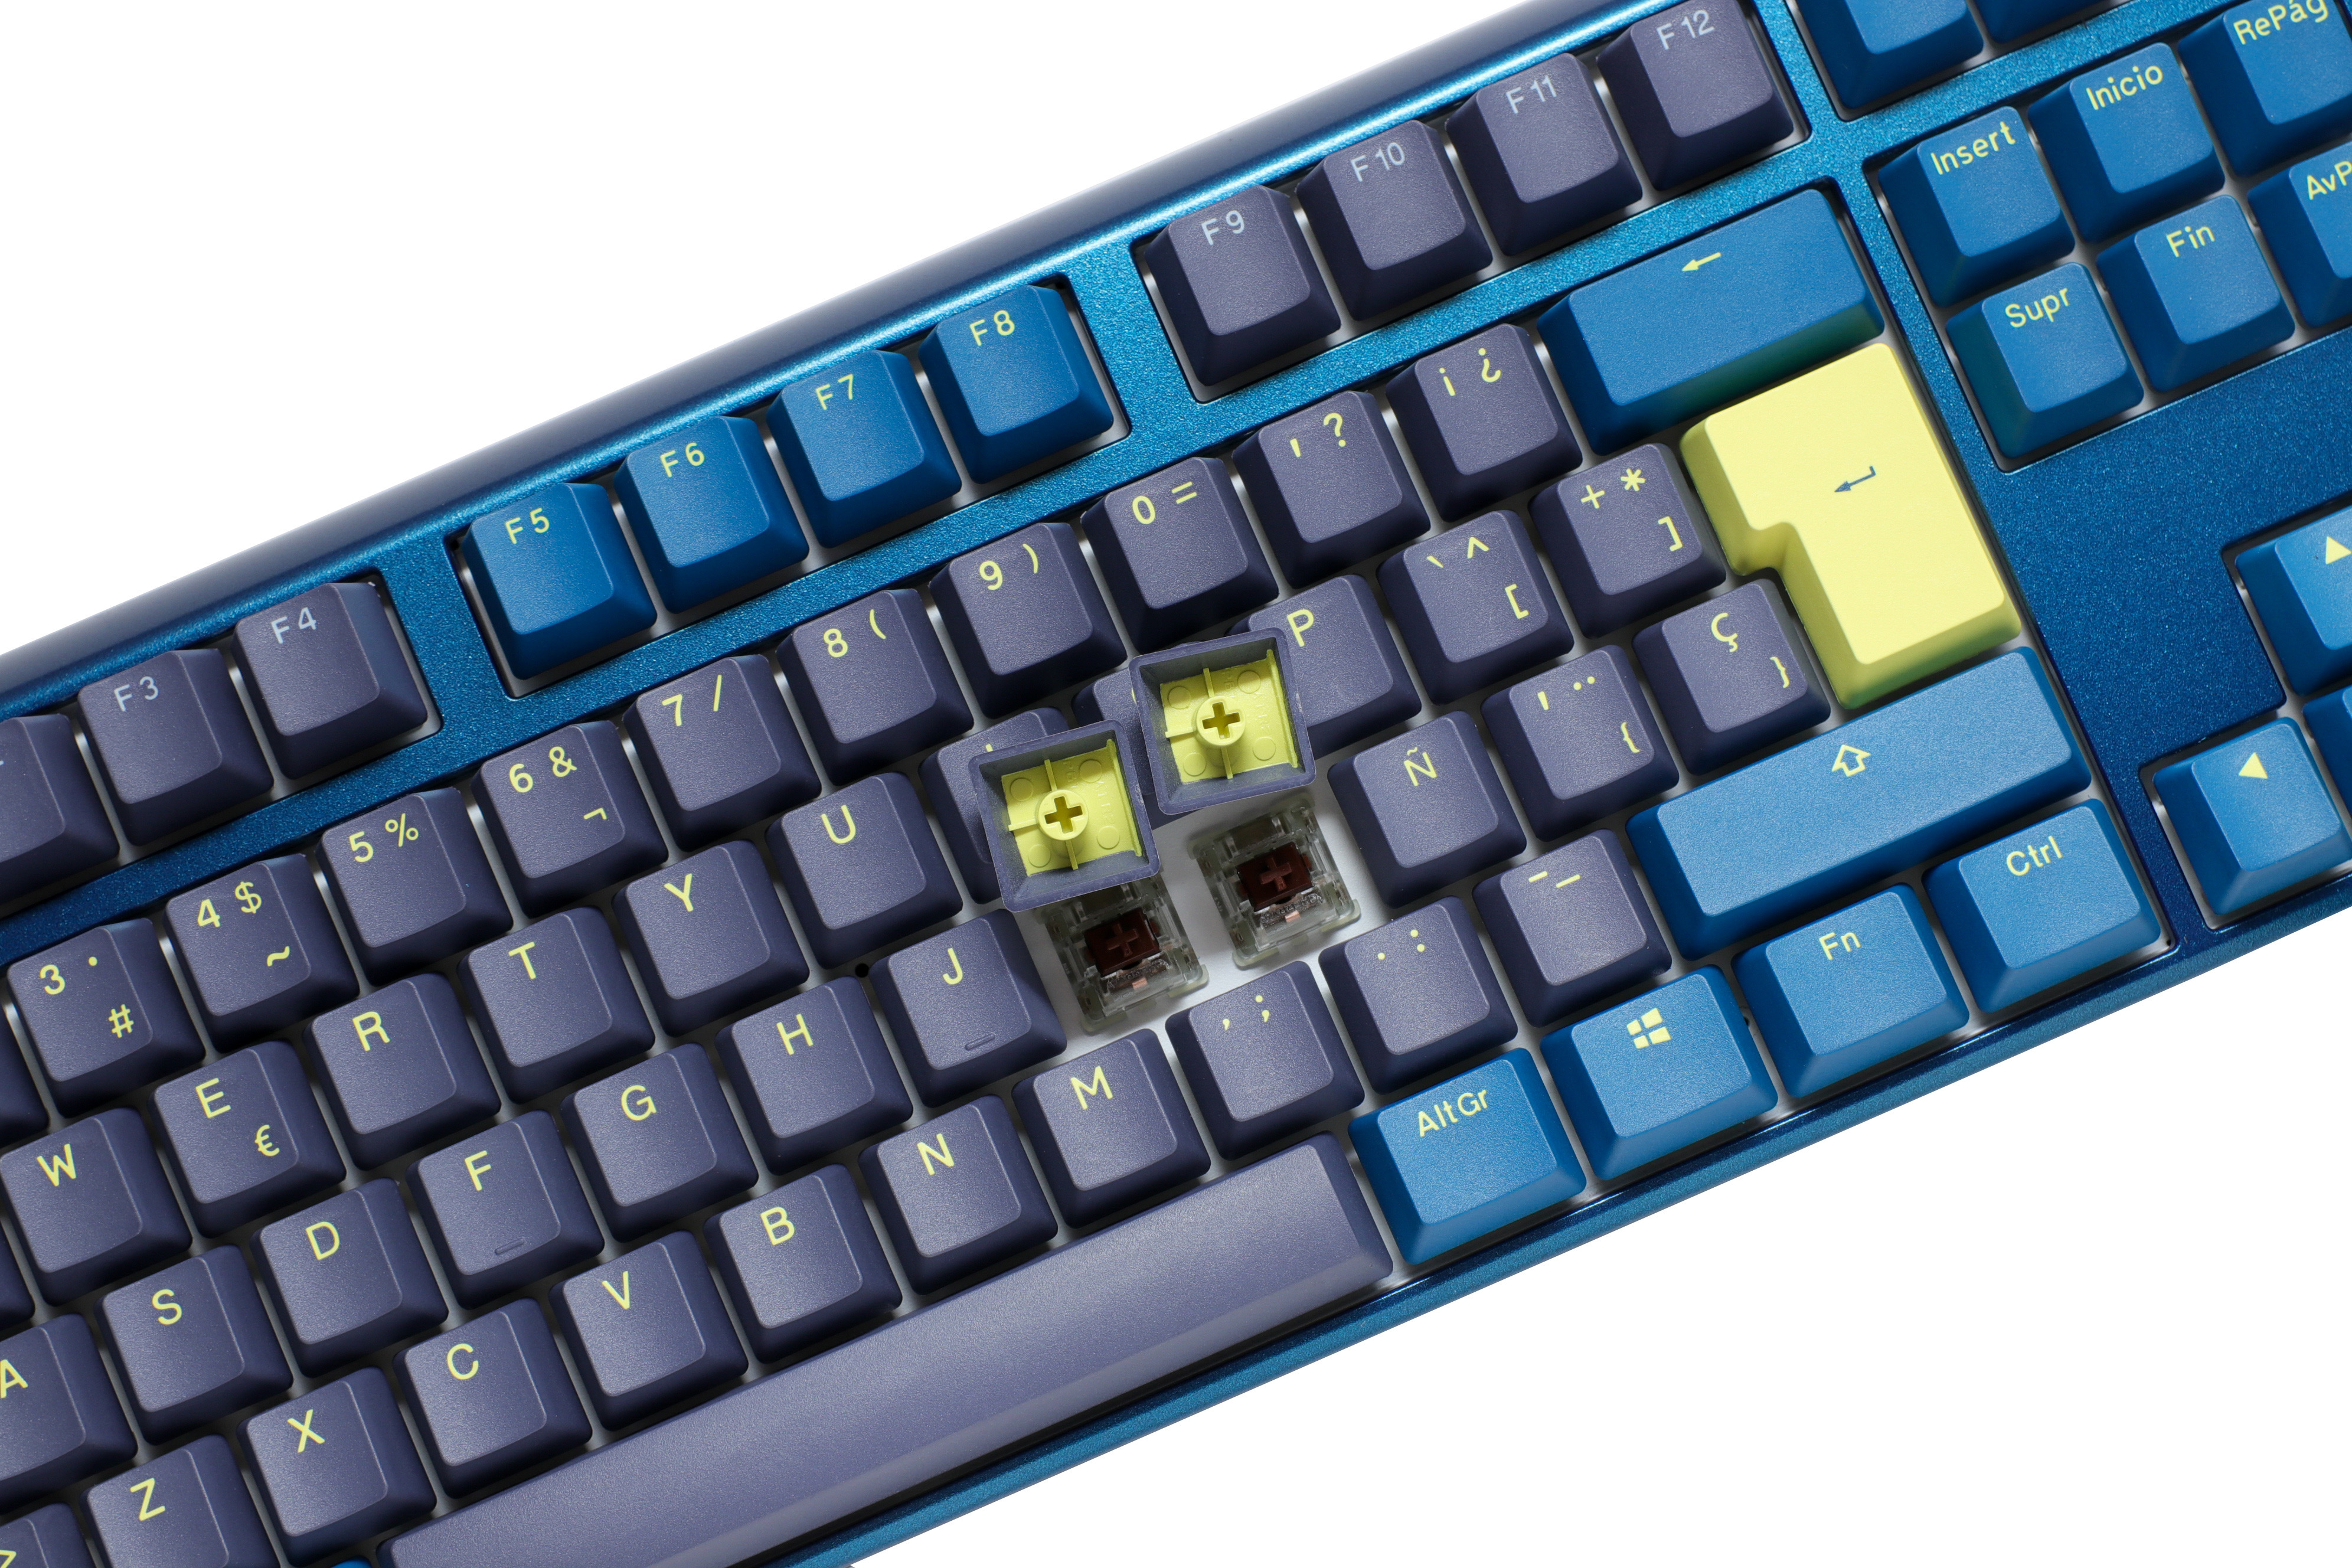 Ducky - Teclado Ducky One 3 Daybreak Full-Size, Hot-swappable, MX-Silver, RGB, PBT - Mecânico (ES)